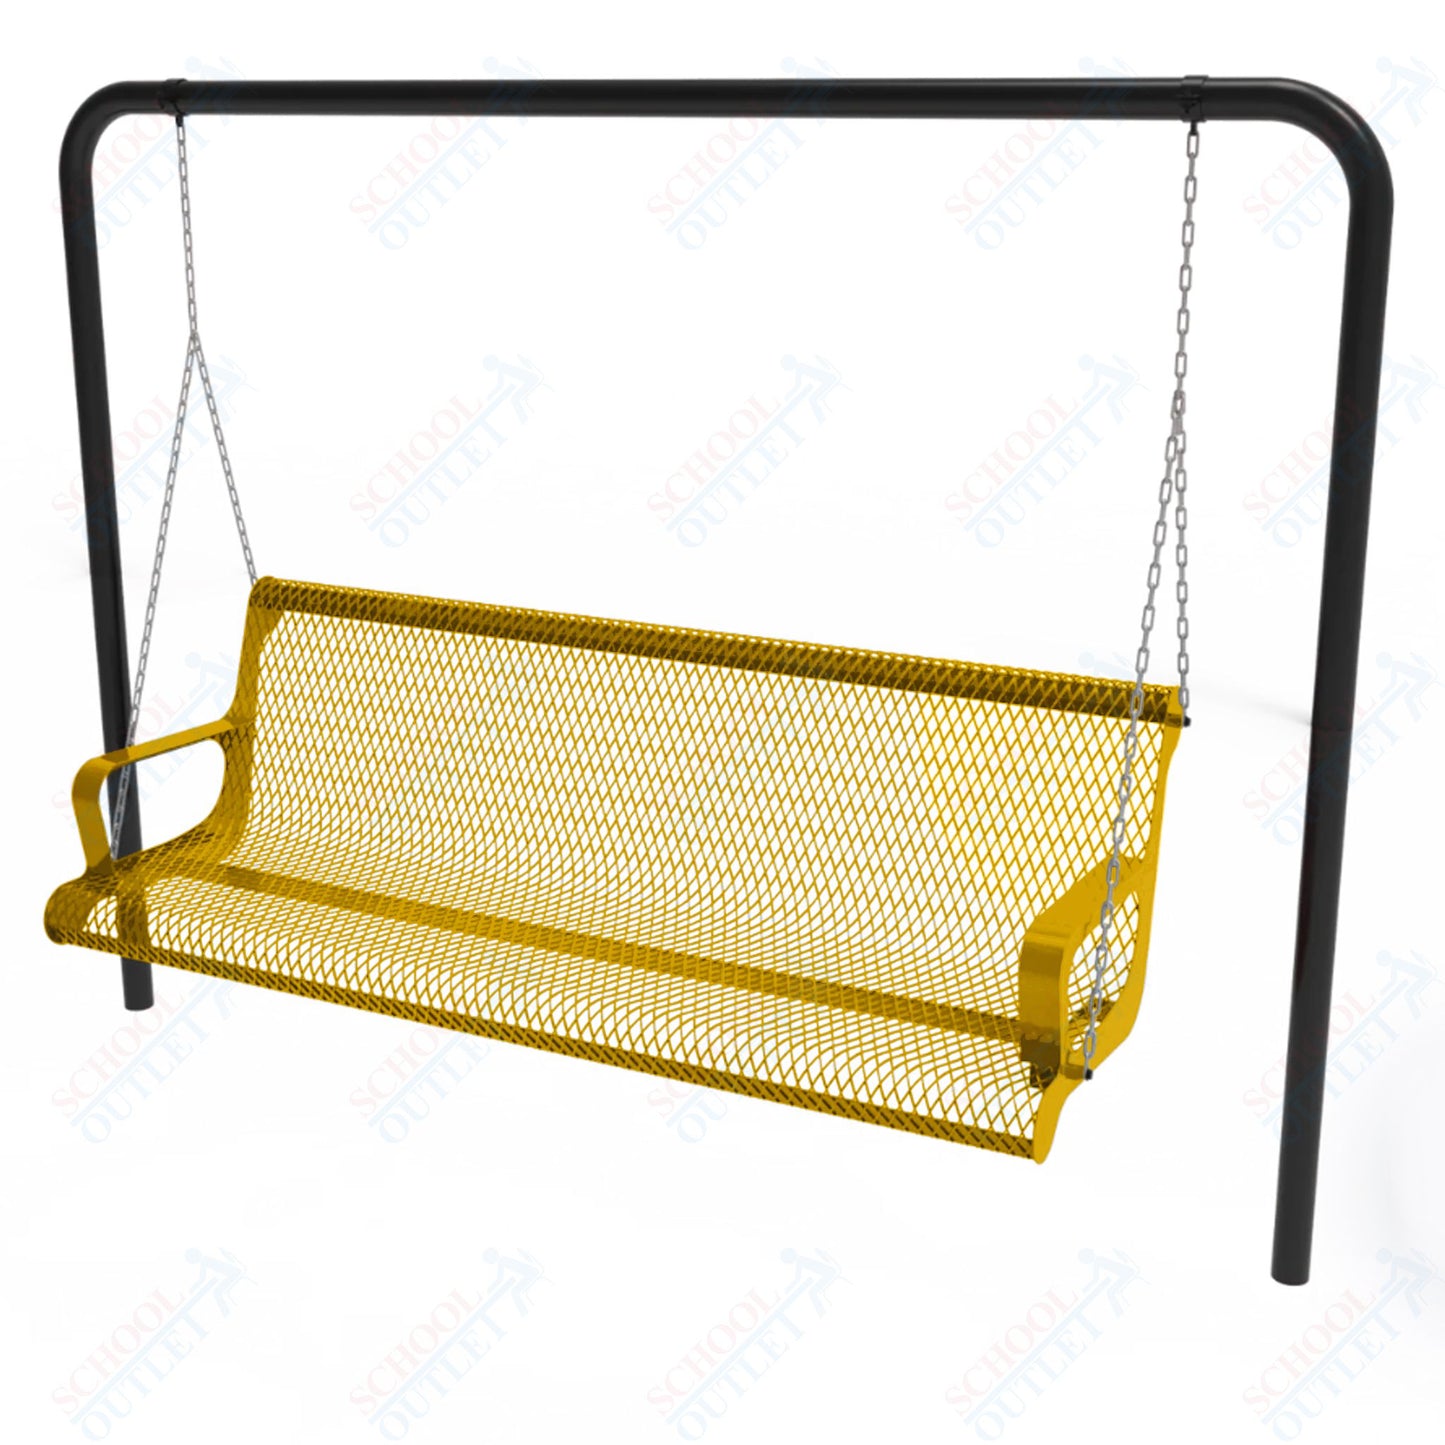 MyTcoat - Contoured Swing Outdoor Bench with Arm - Inground Mount 6' L (MYT-BCA06-68)